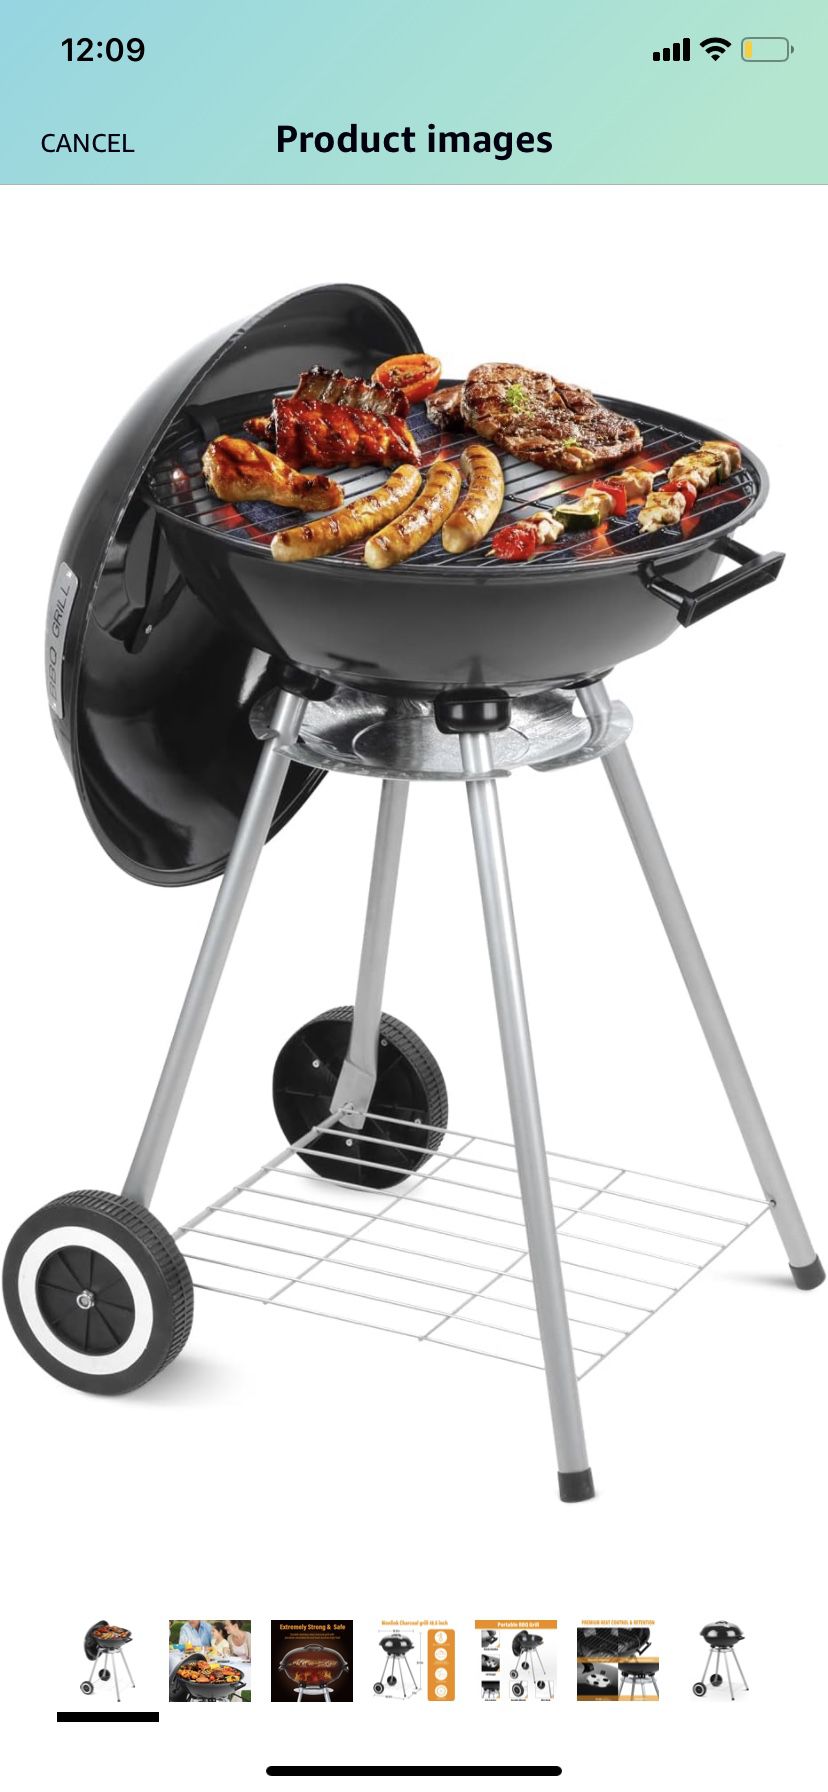 Portable Charcoal Grill, 18.5 Inch Camping BBQ Grill with Wheels for Outdoor Cooking Picnic Barbecue